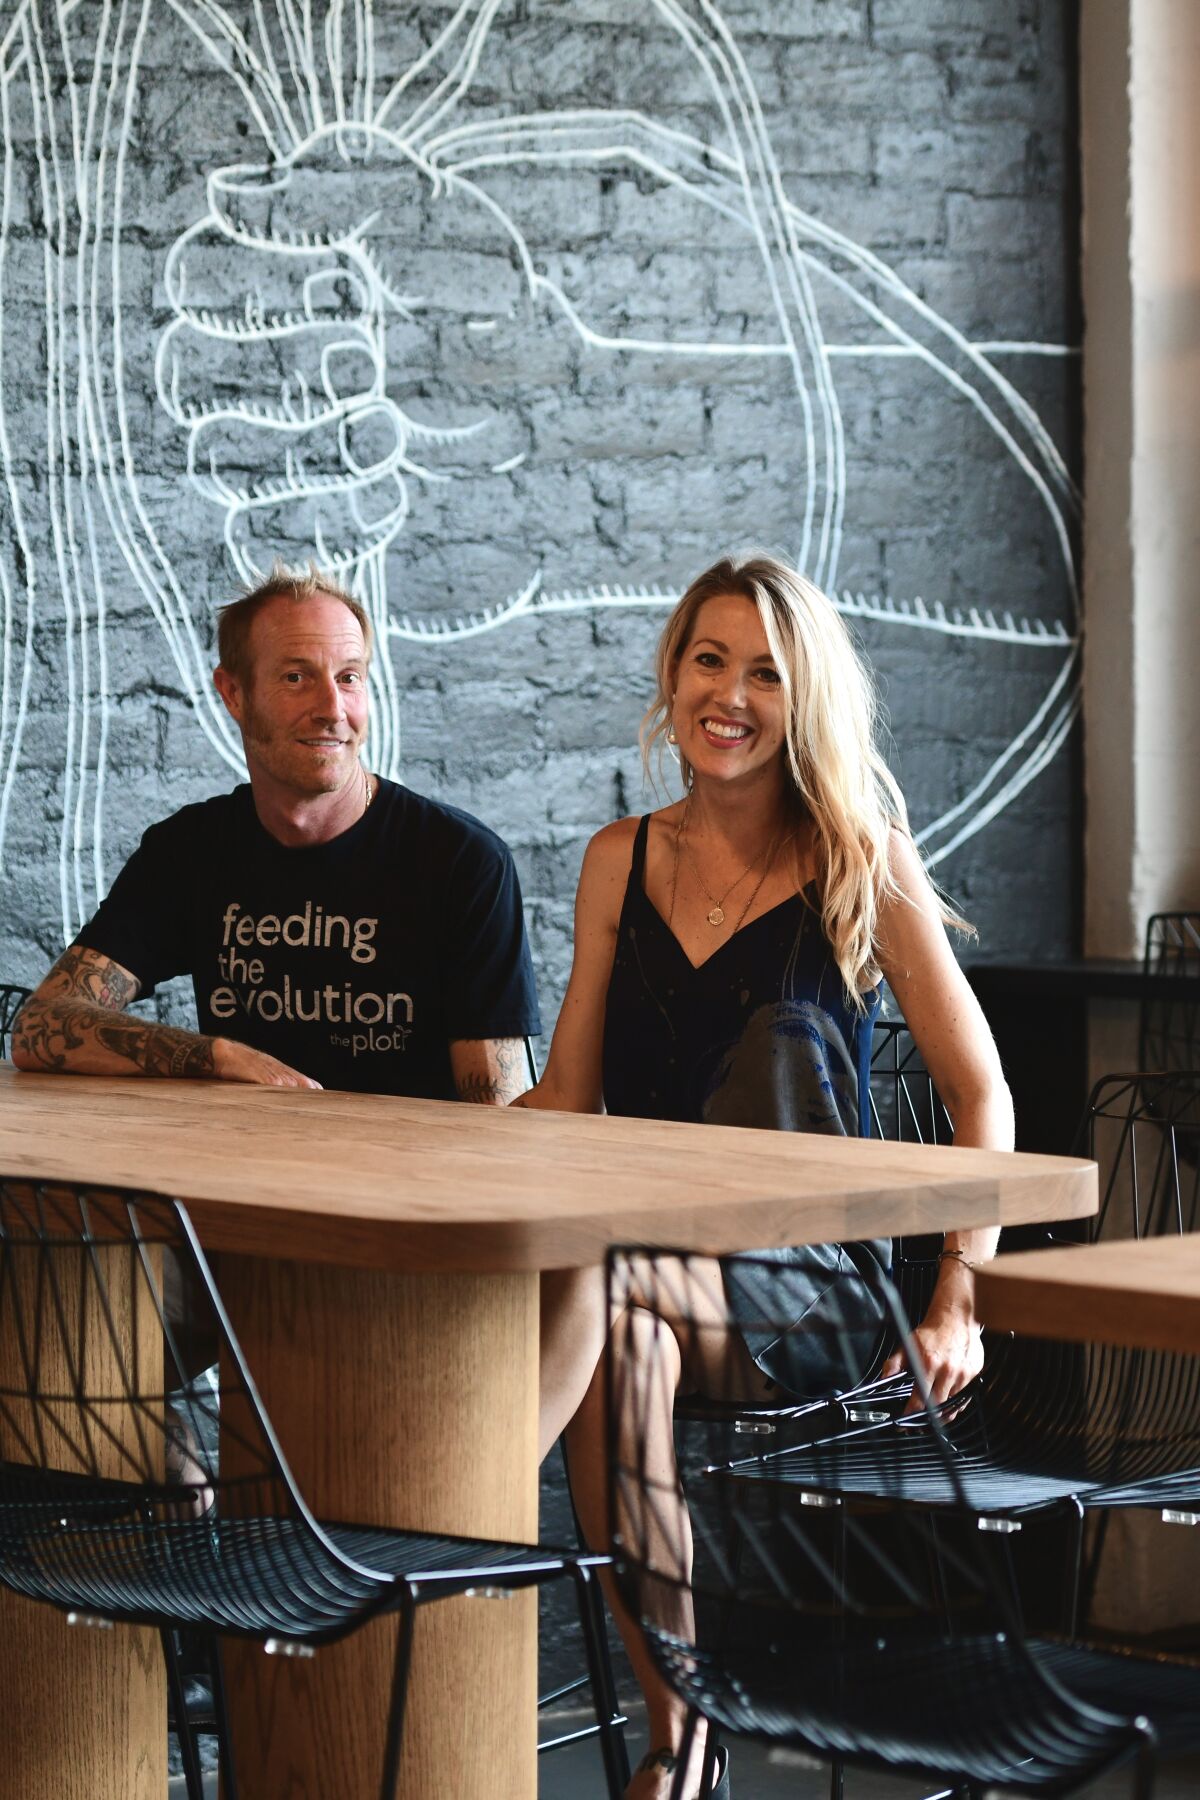 Davin and Jessica Waite, co-owners of The Plot, a plant-based, zero-waste restaurant in Oceanside.